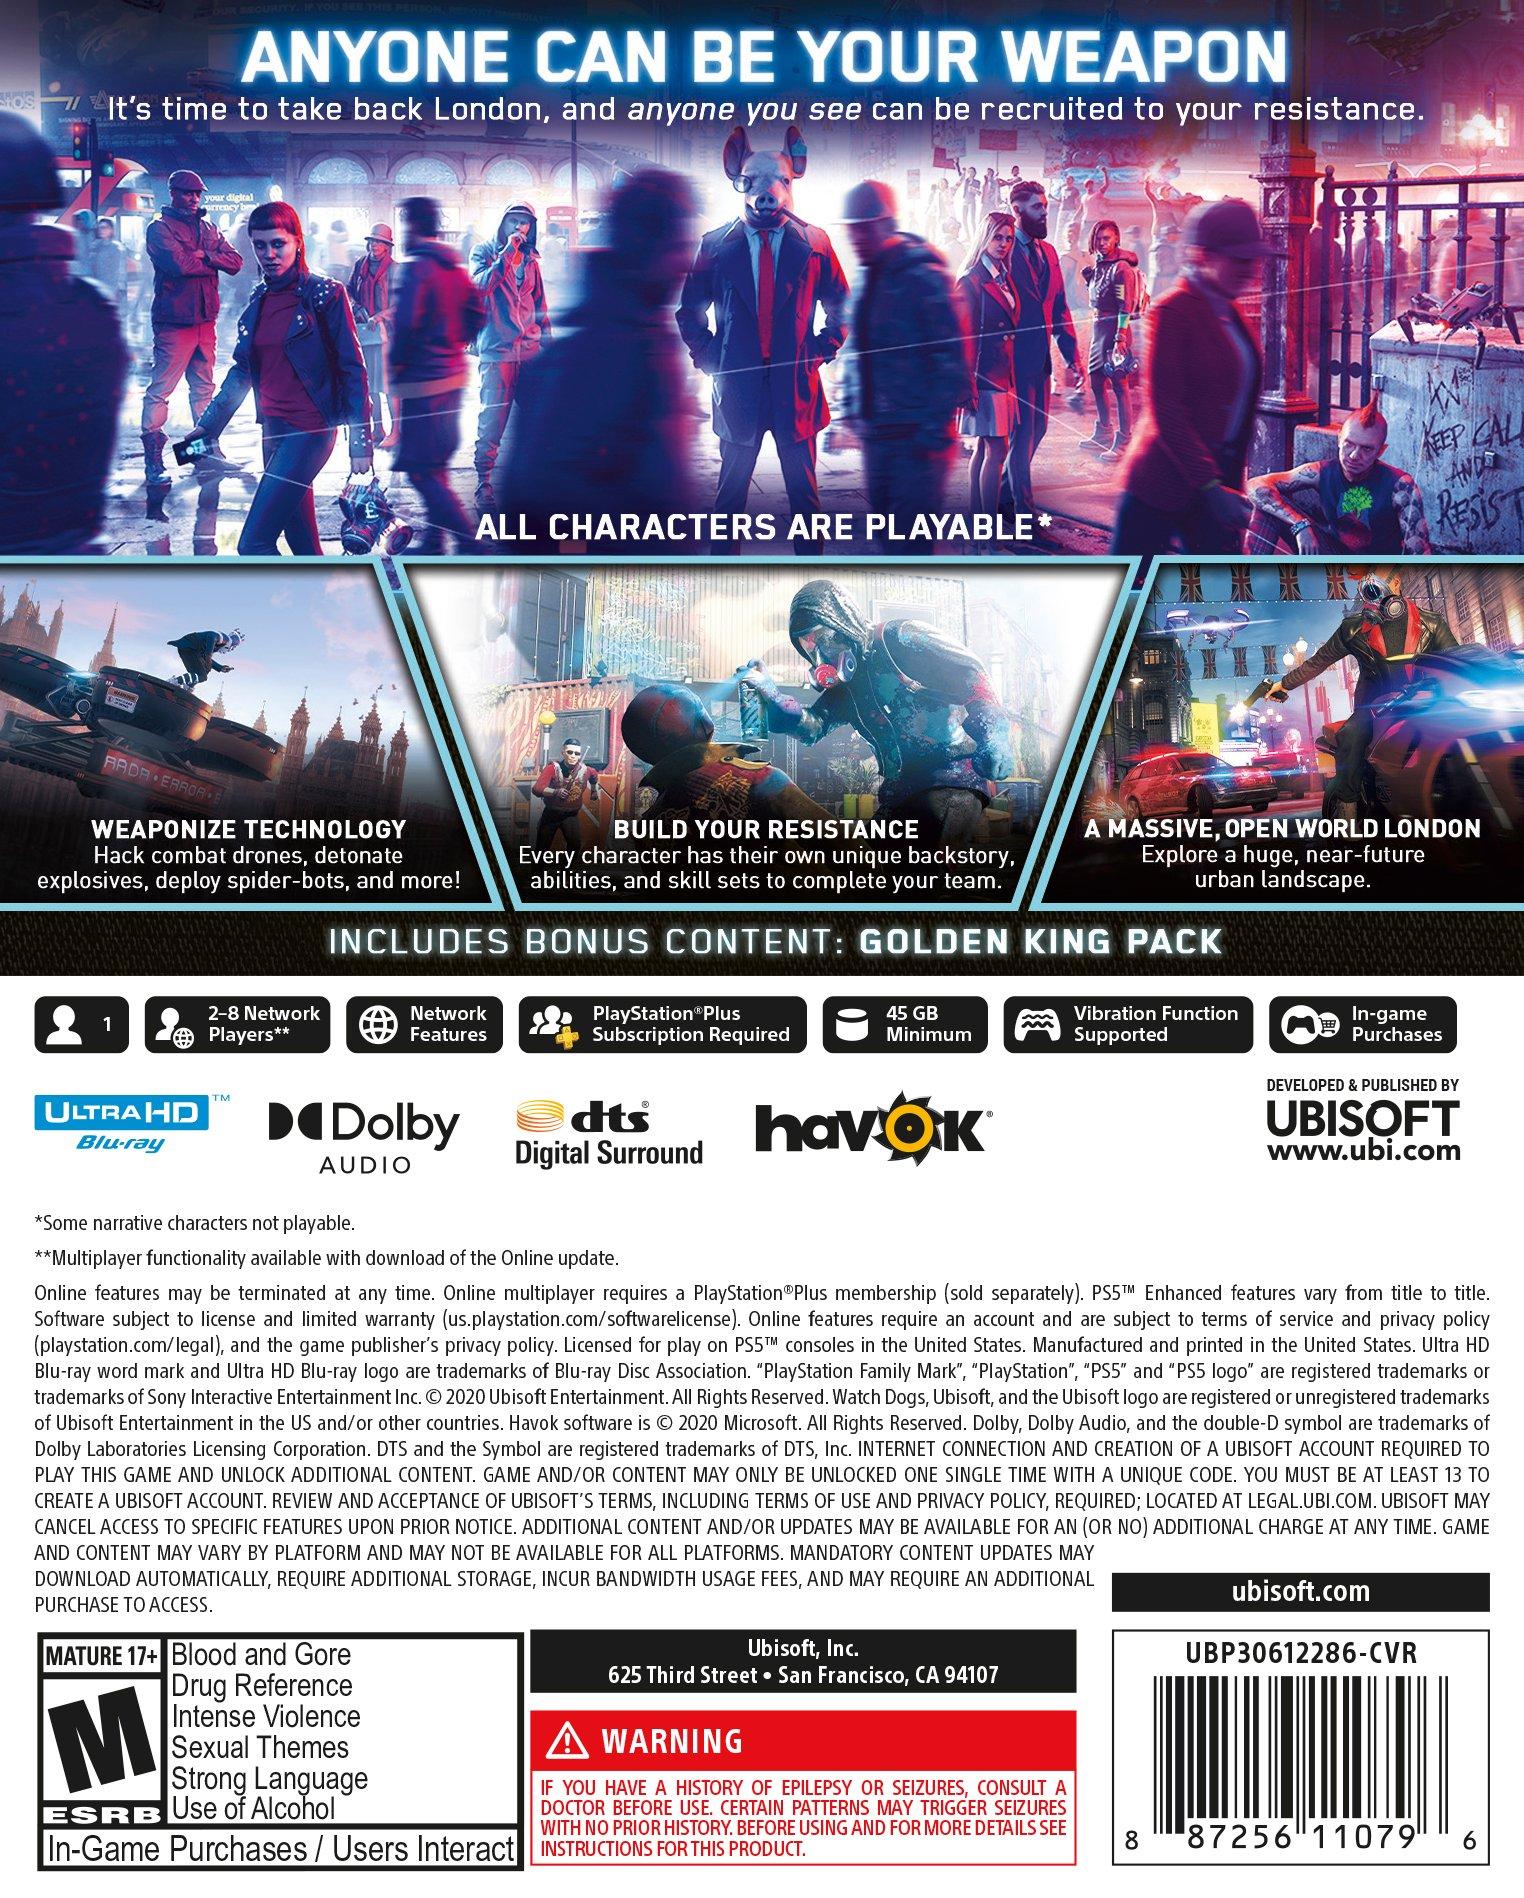 Watch Dogs Legion Deluxe Edition - PlayStation 5